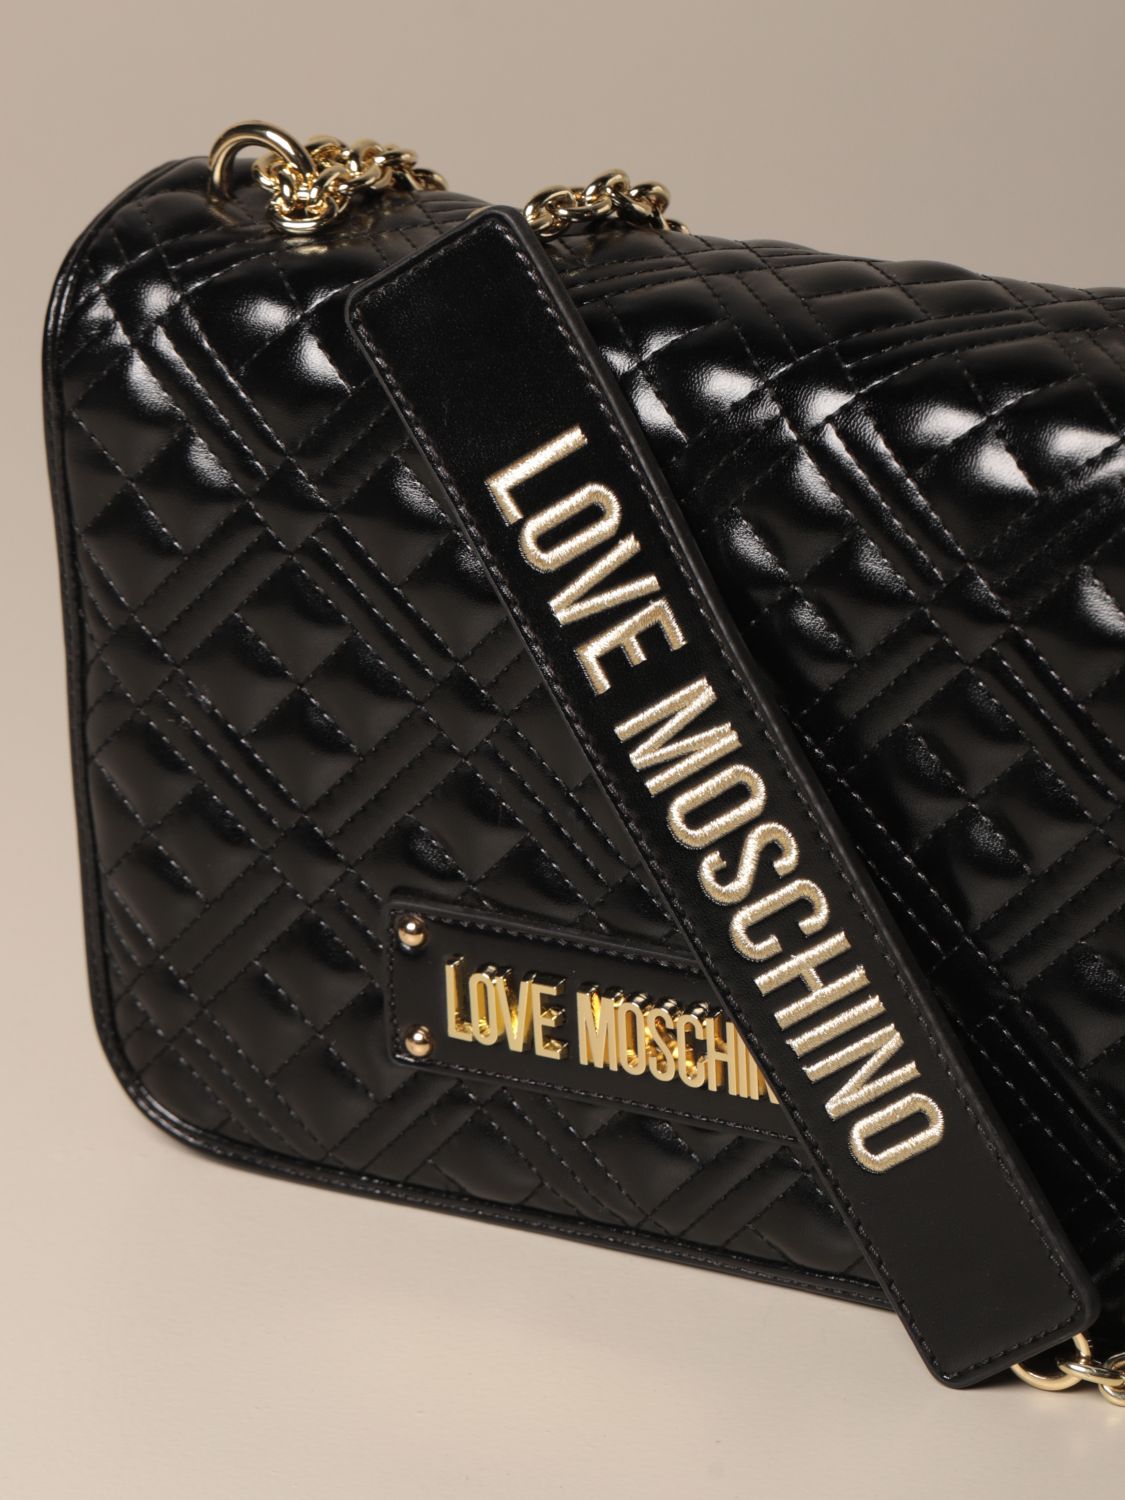 love moschino quilted bag